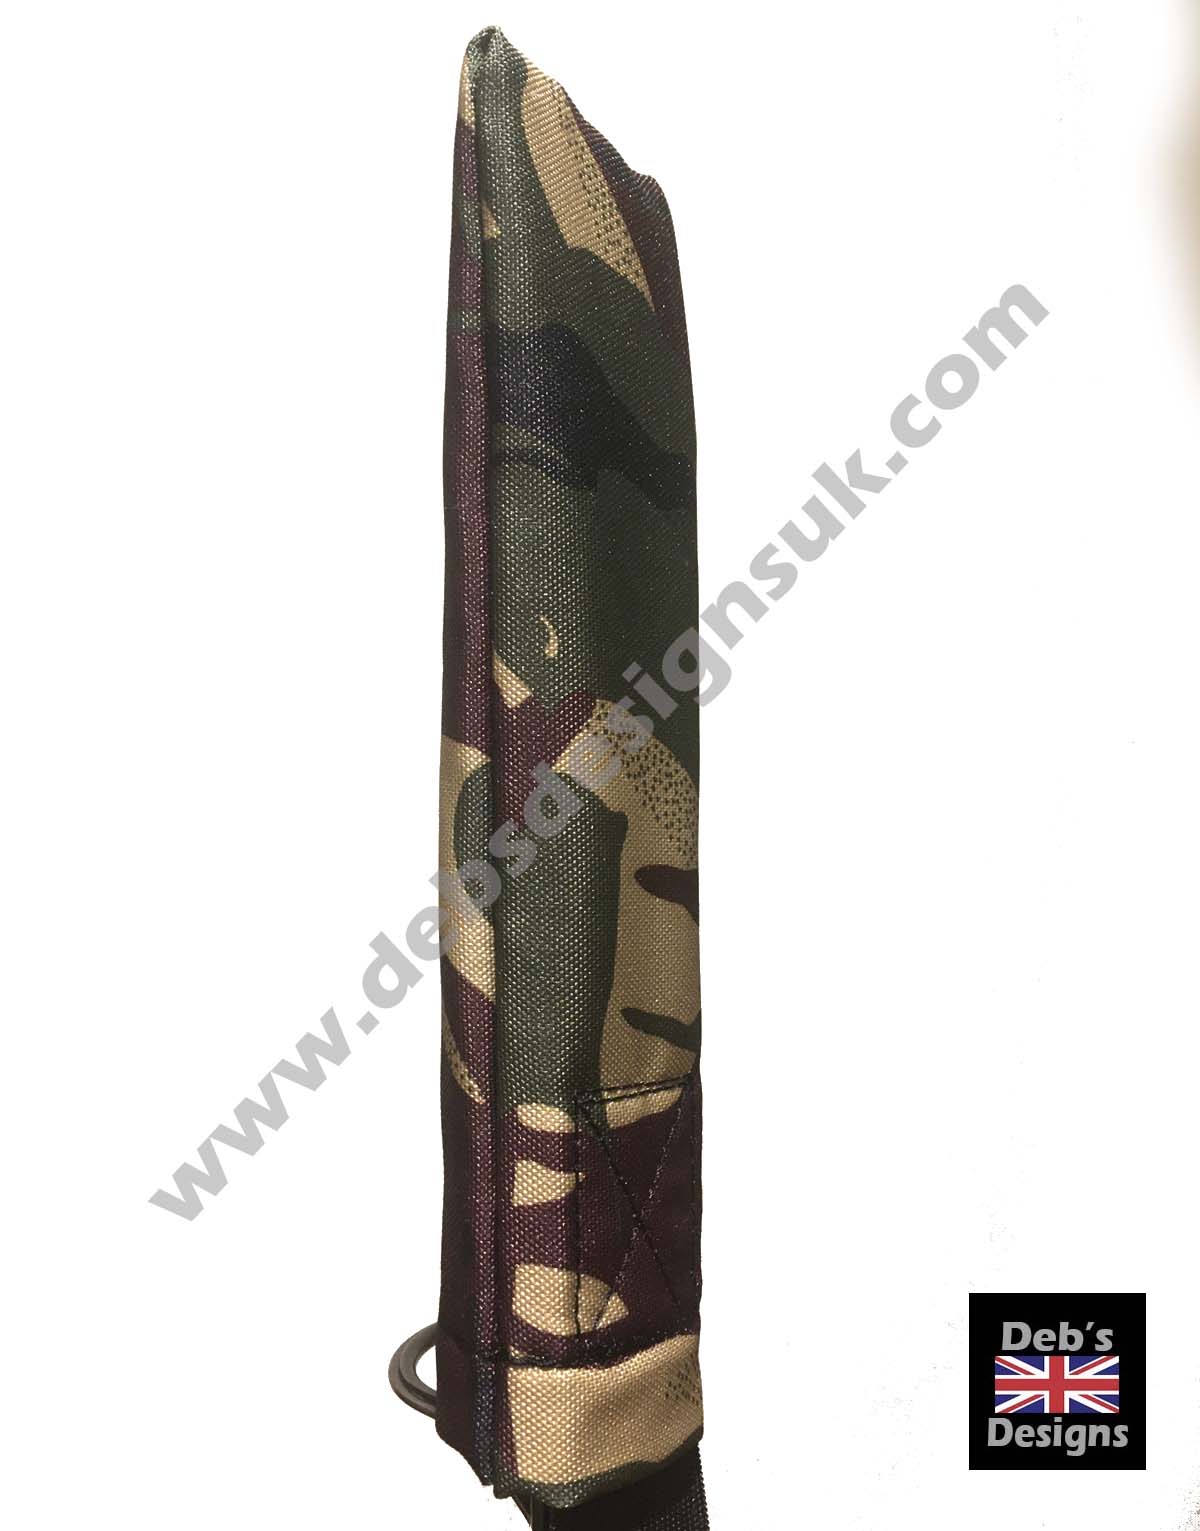 Rod Tip And Butt Protector In Camo Hybrid Short For 9-10 Foot Rod Carp –  Debsdesignsuk